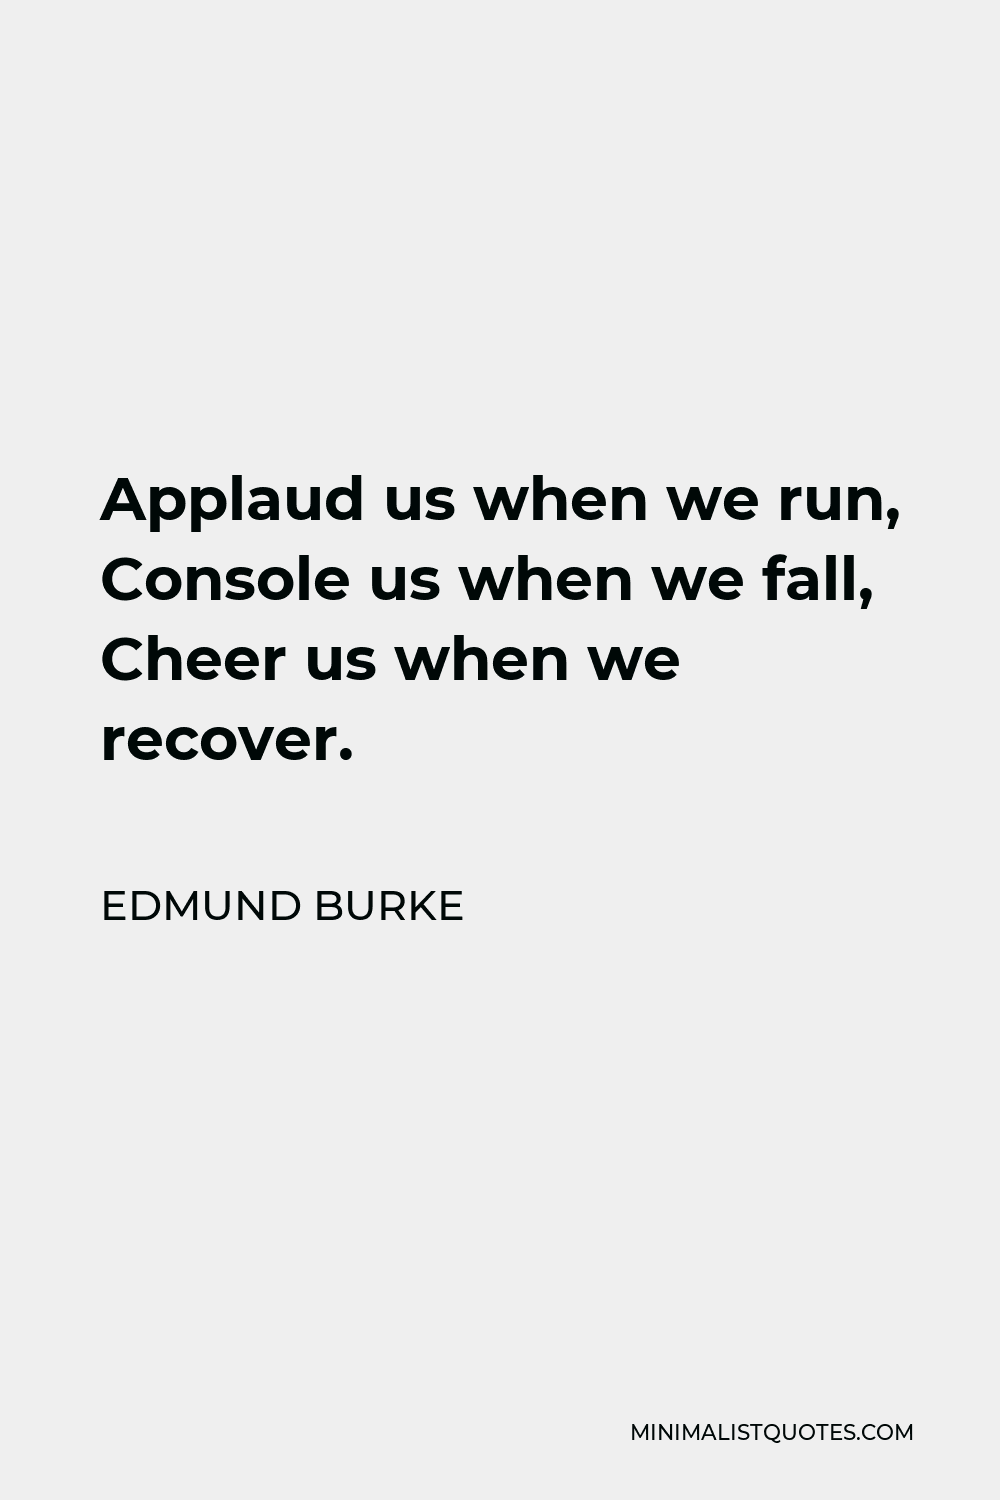 Edmund Burke Quote - Applaud us when we run, Console us when we fall, Cheer us when we recover.